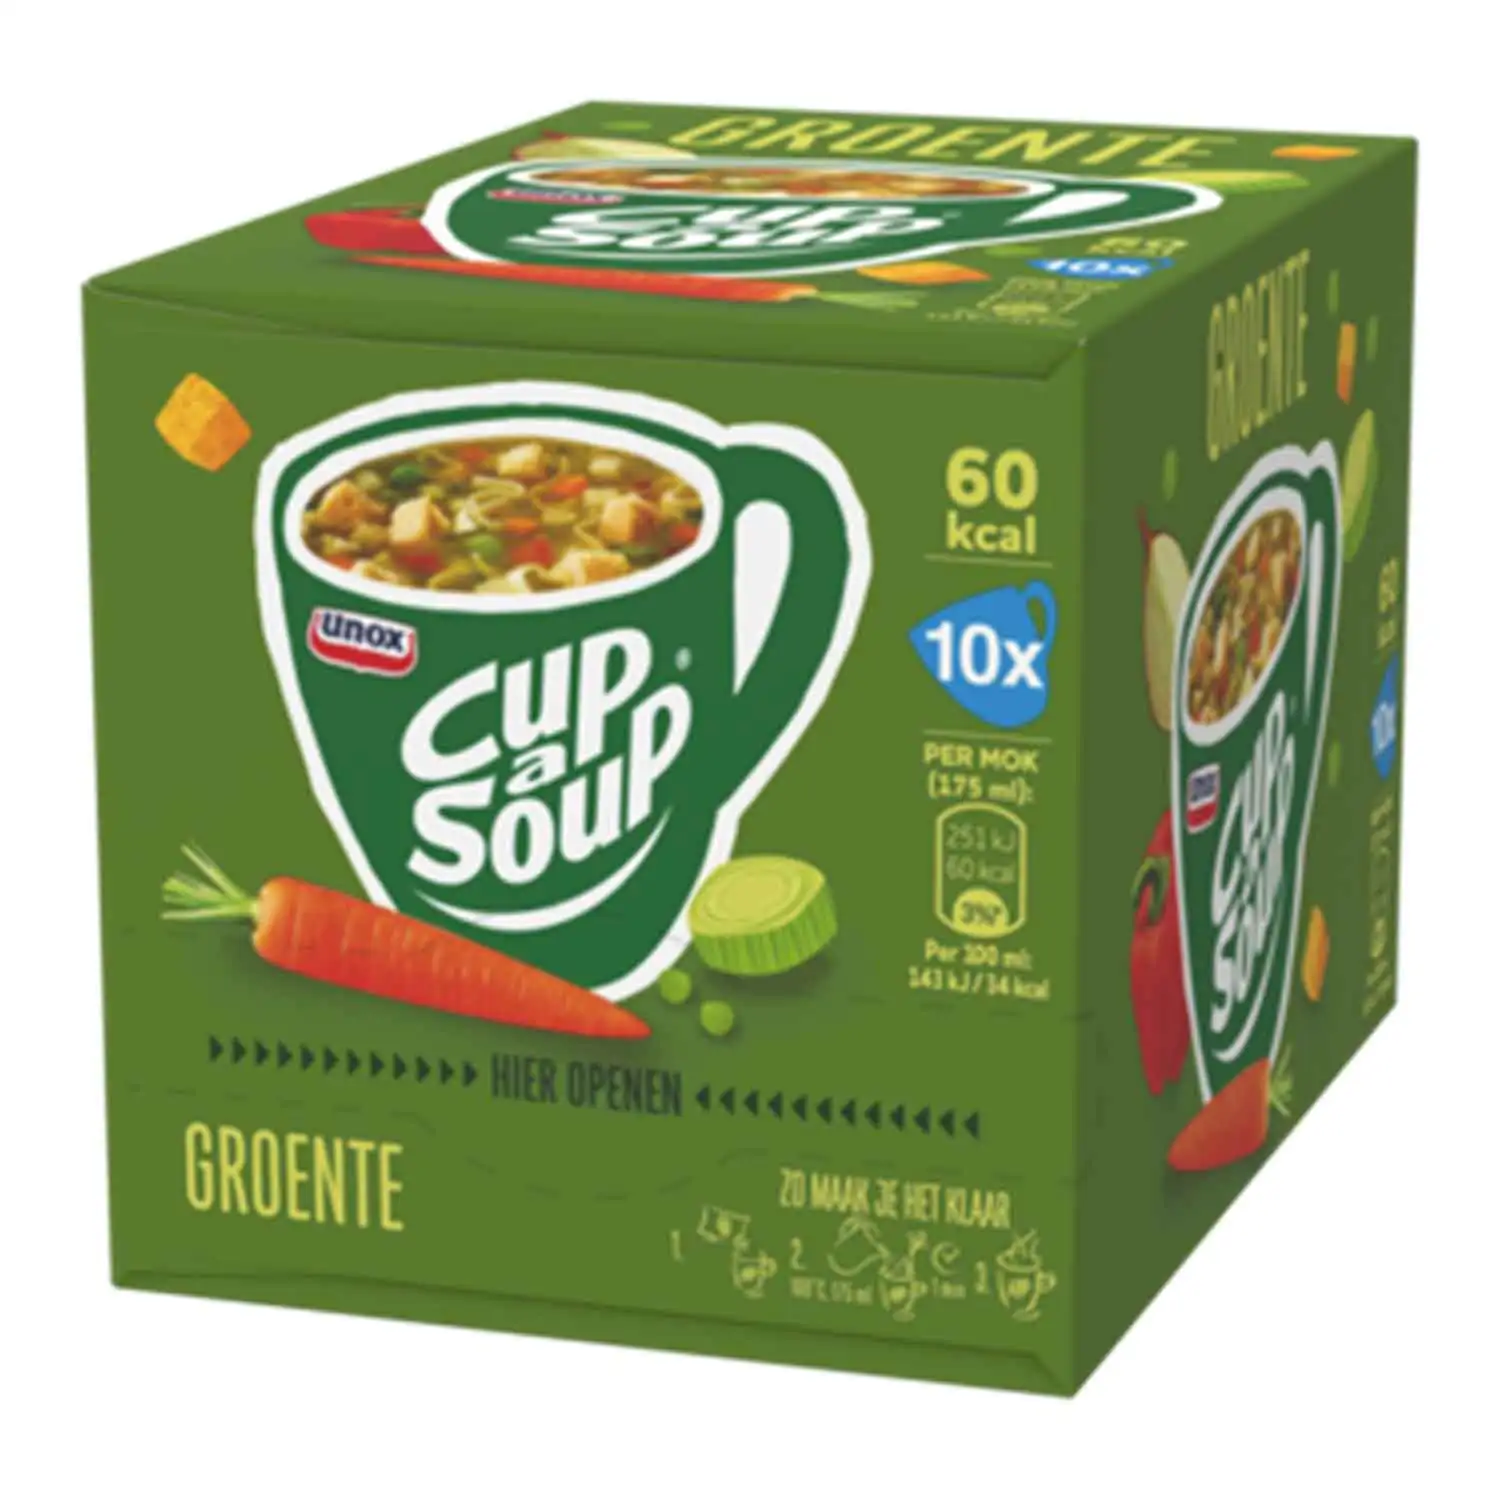 10x Cup a Soup vegetable 16g - Buy at Real Tobacco